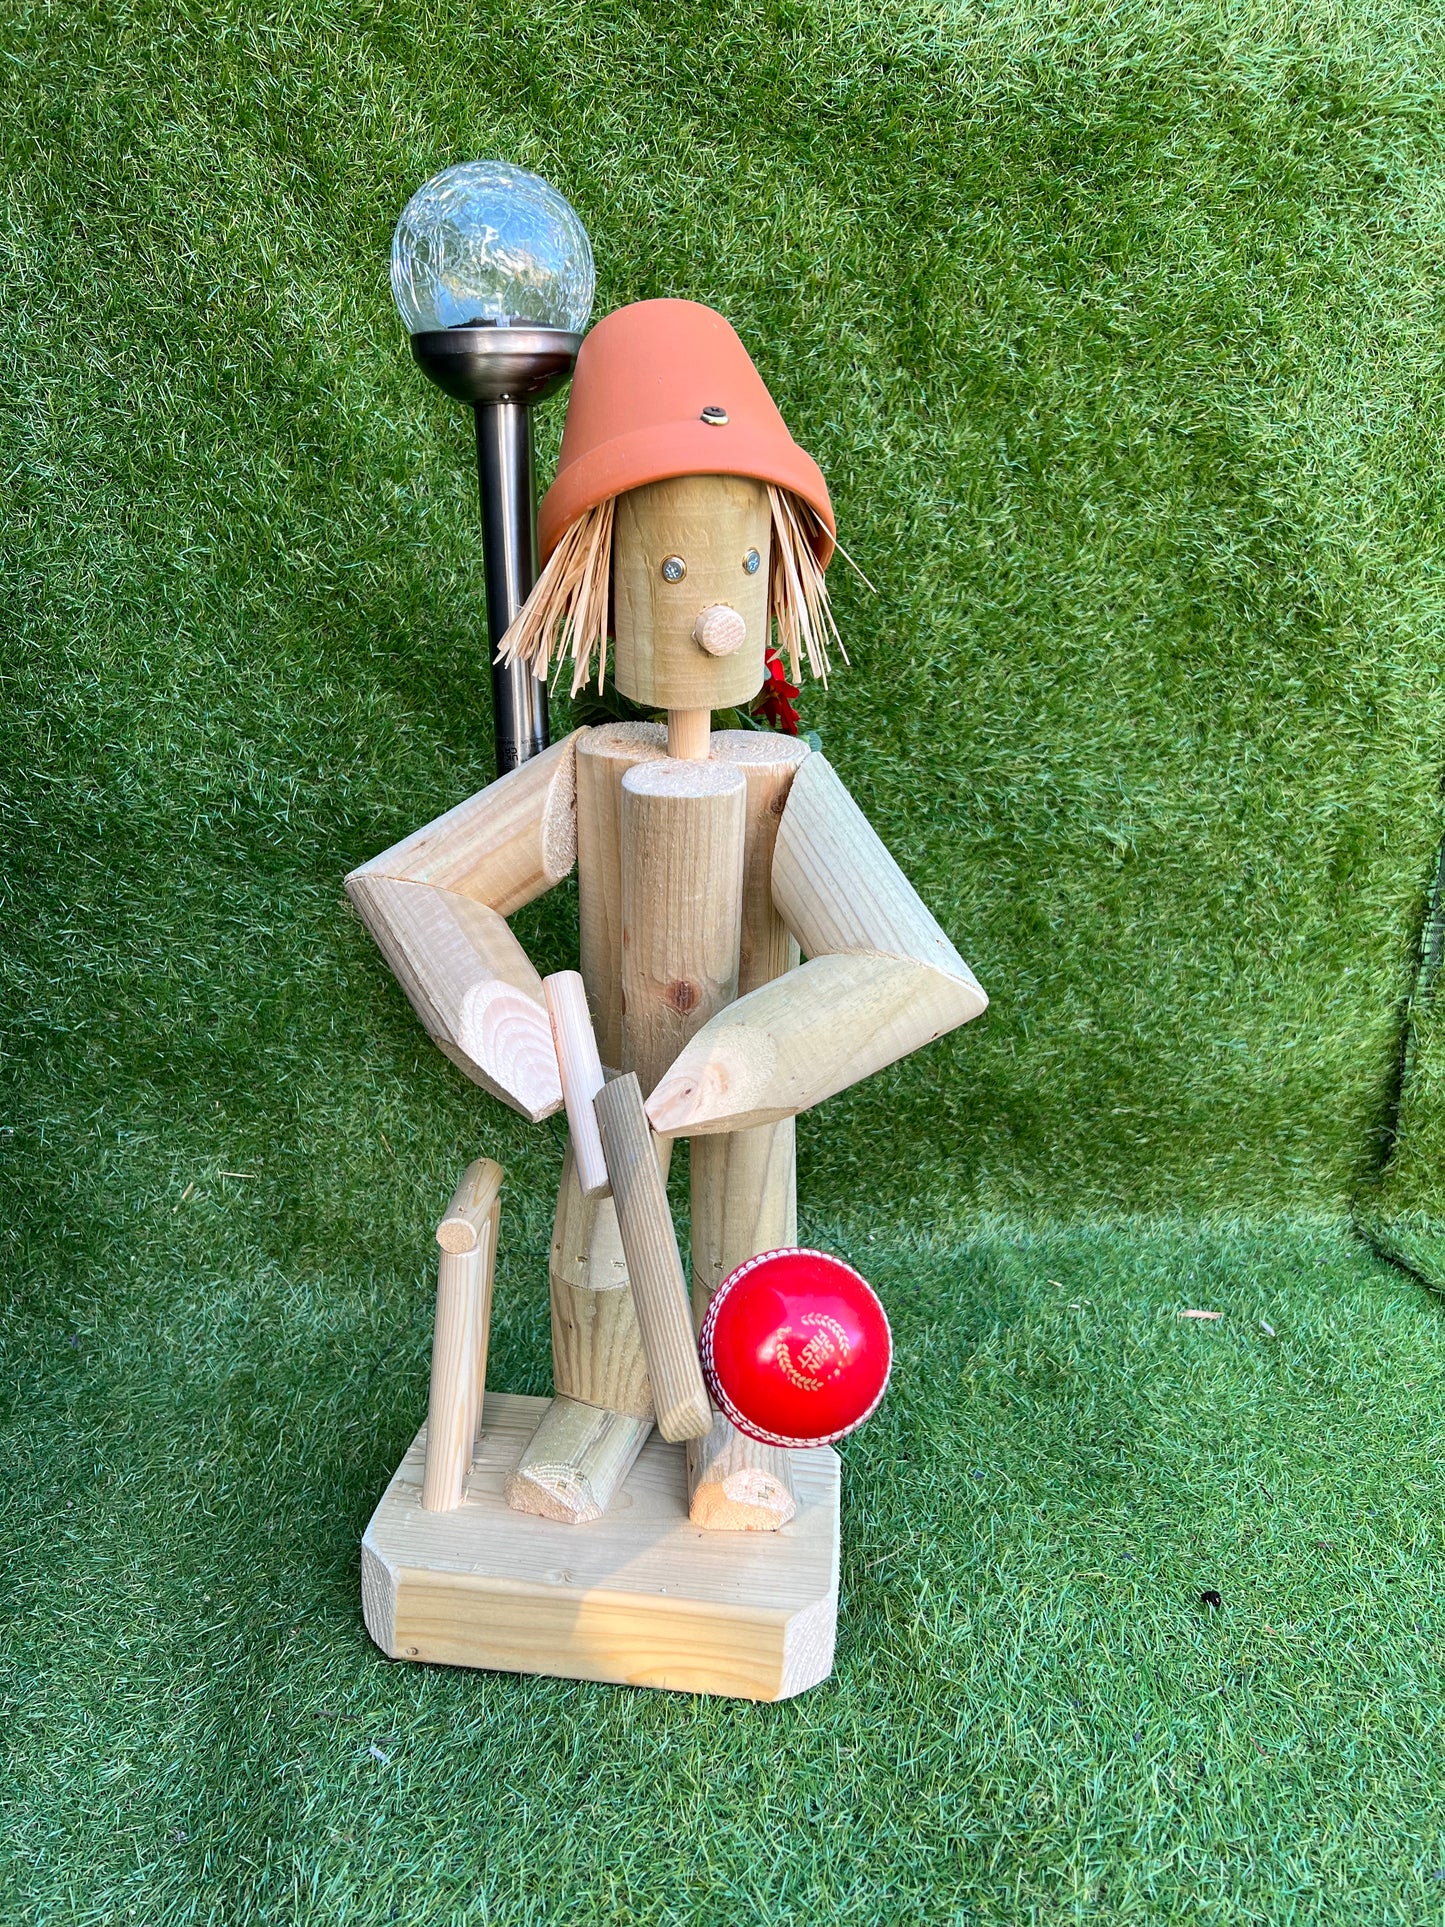 Cricket player with a solar light